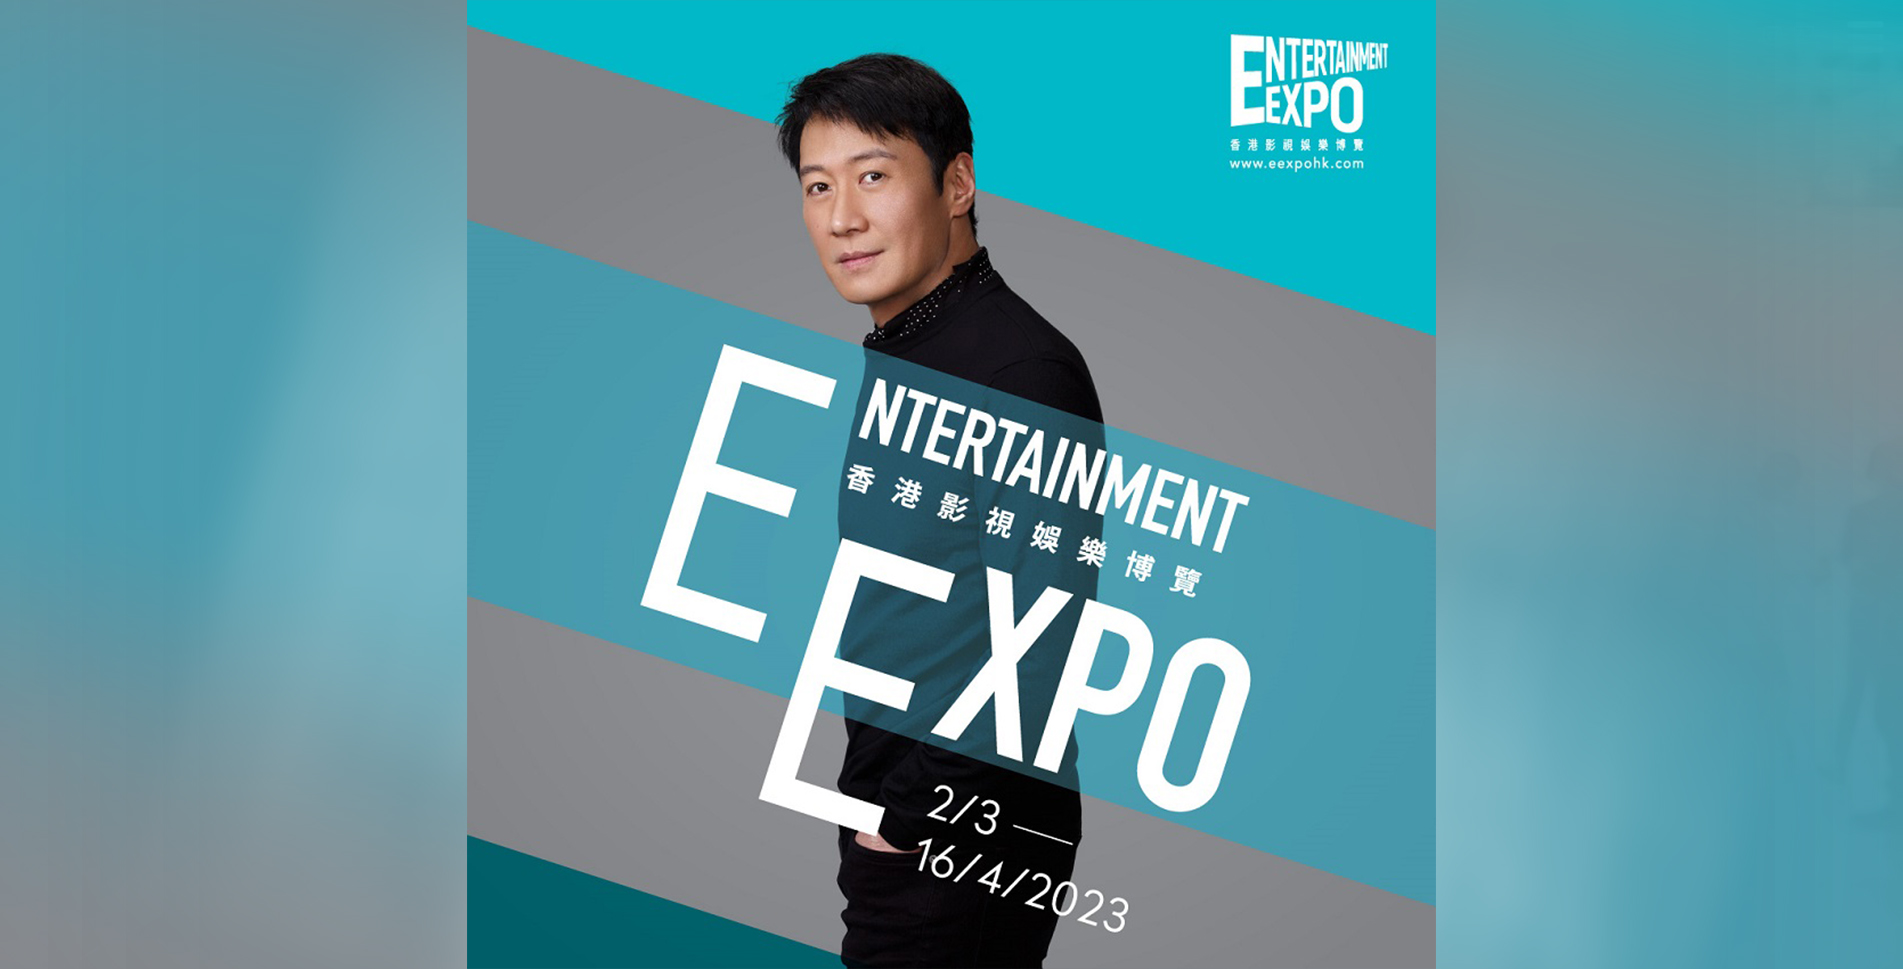 Leon Lai continues to serve as the ambassador to foster the development of Hong Kong's creative and film industries.